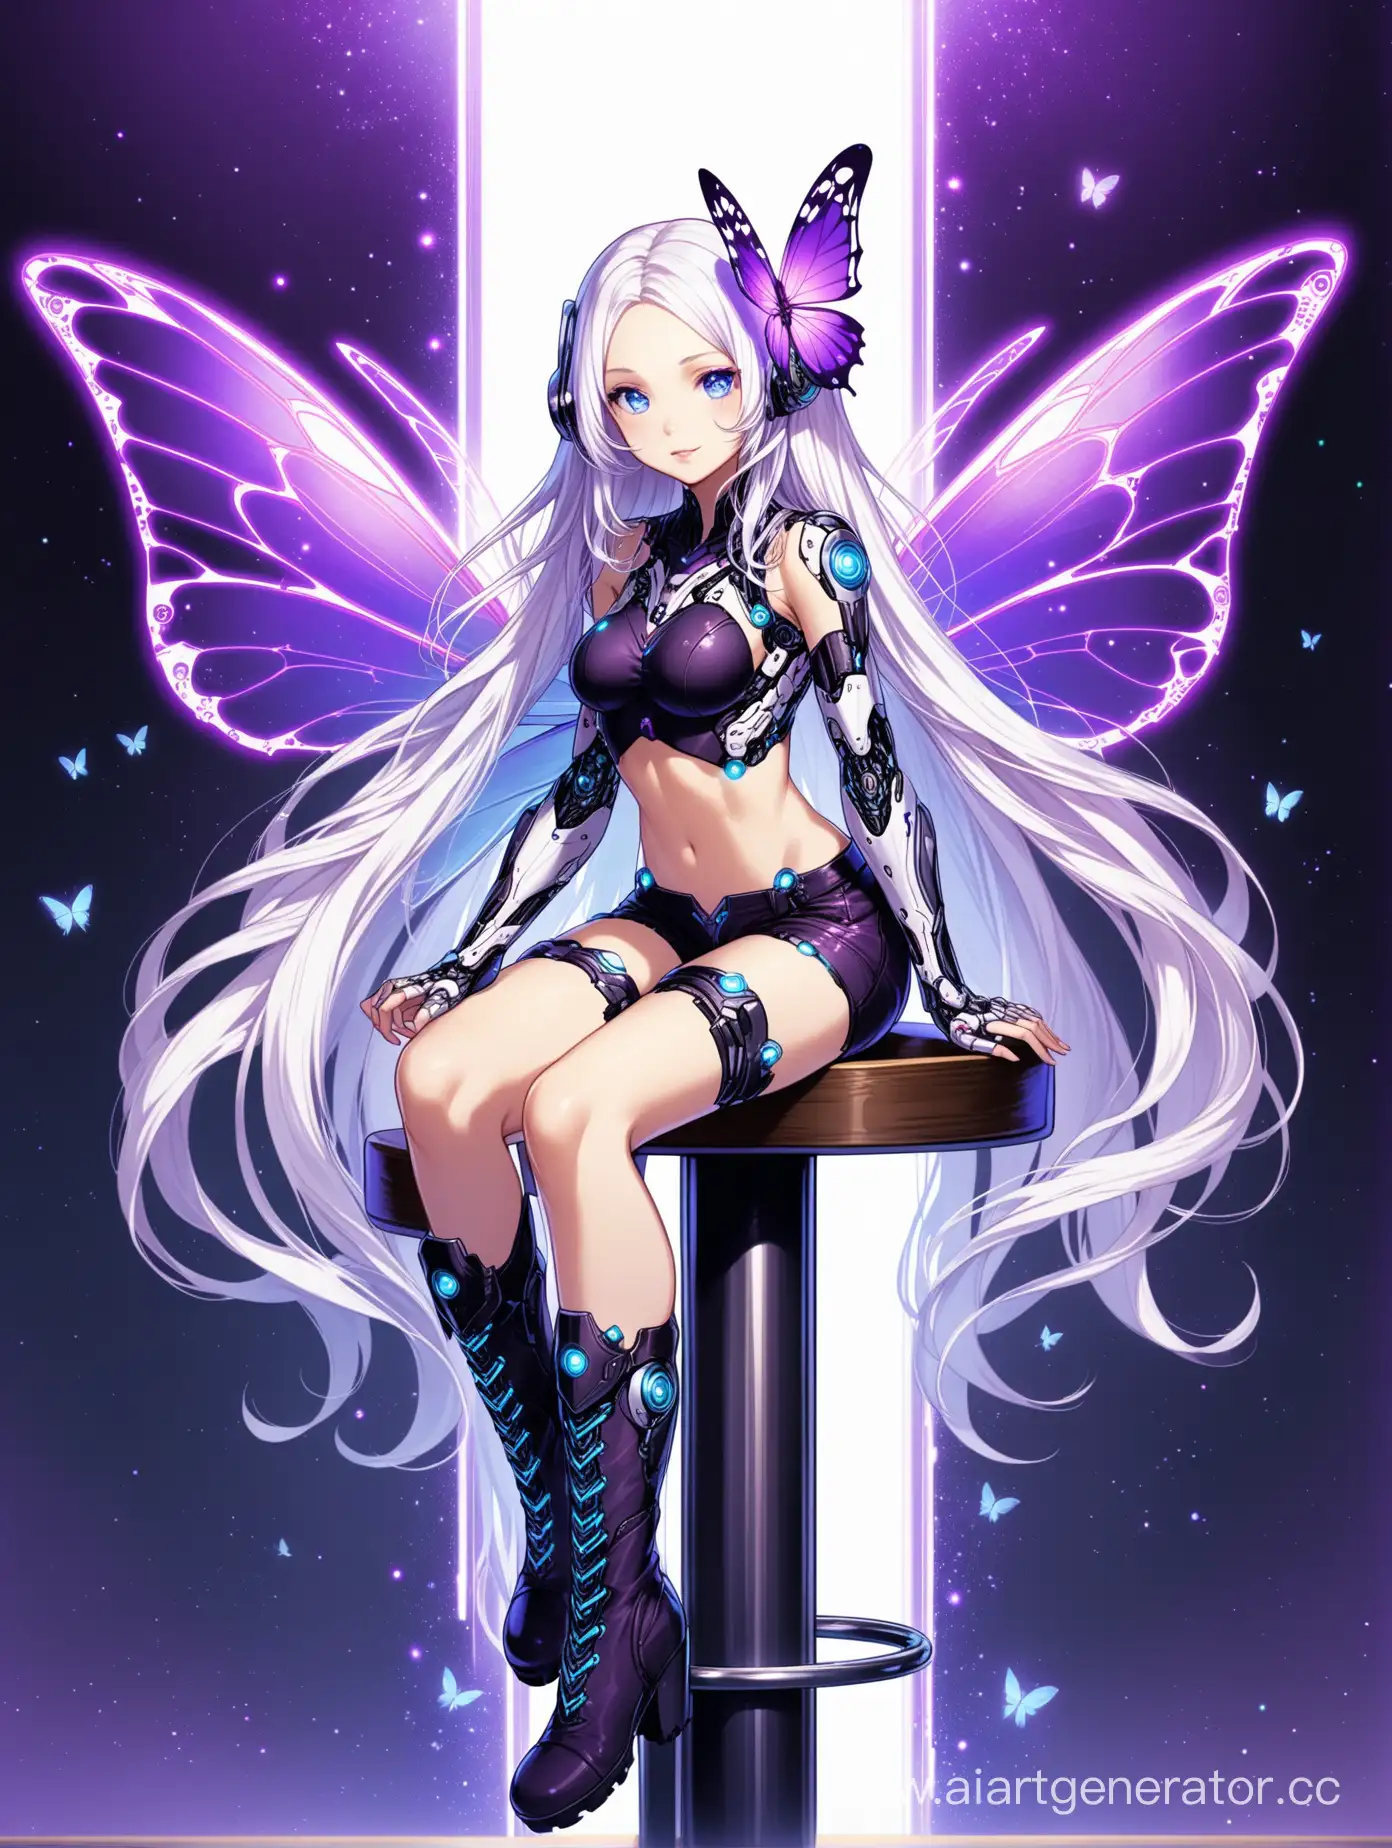 Cyborg girl is a fairy with purple butterfly wings. She has long white curly hair, blue eyes. She's sitting on a bar stool. She is wearing short shorts with lace, a top and high boots.